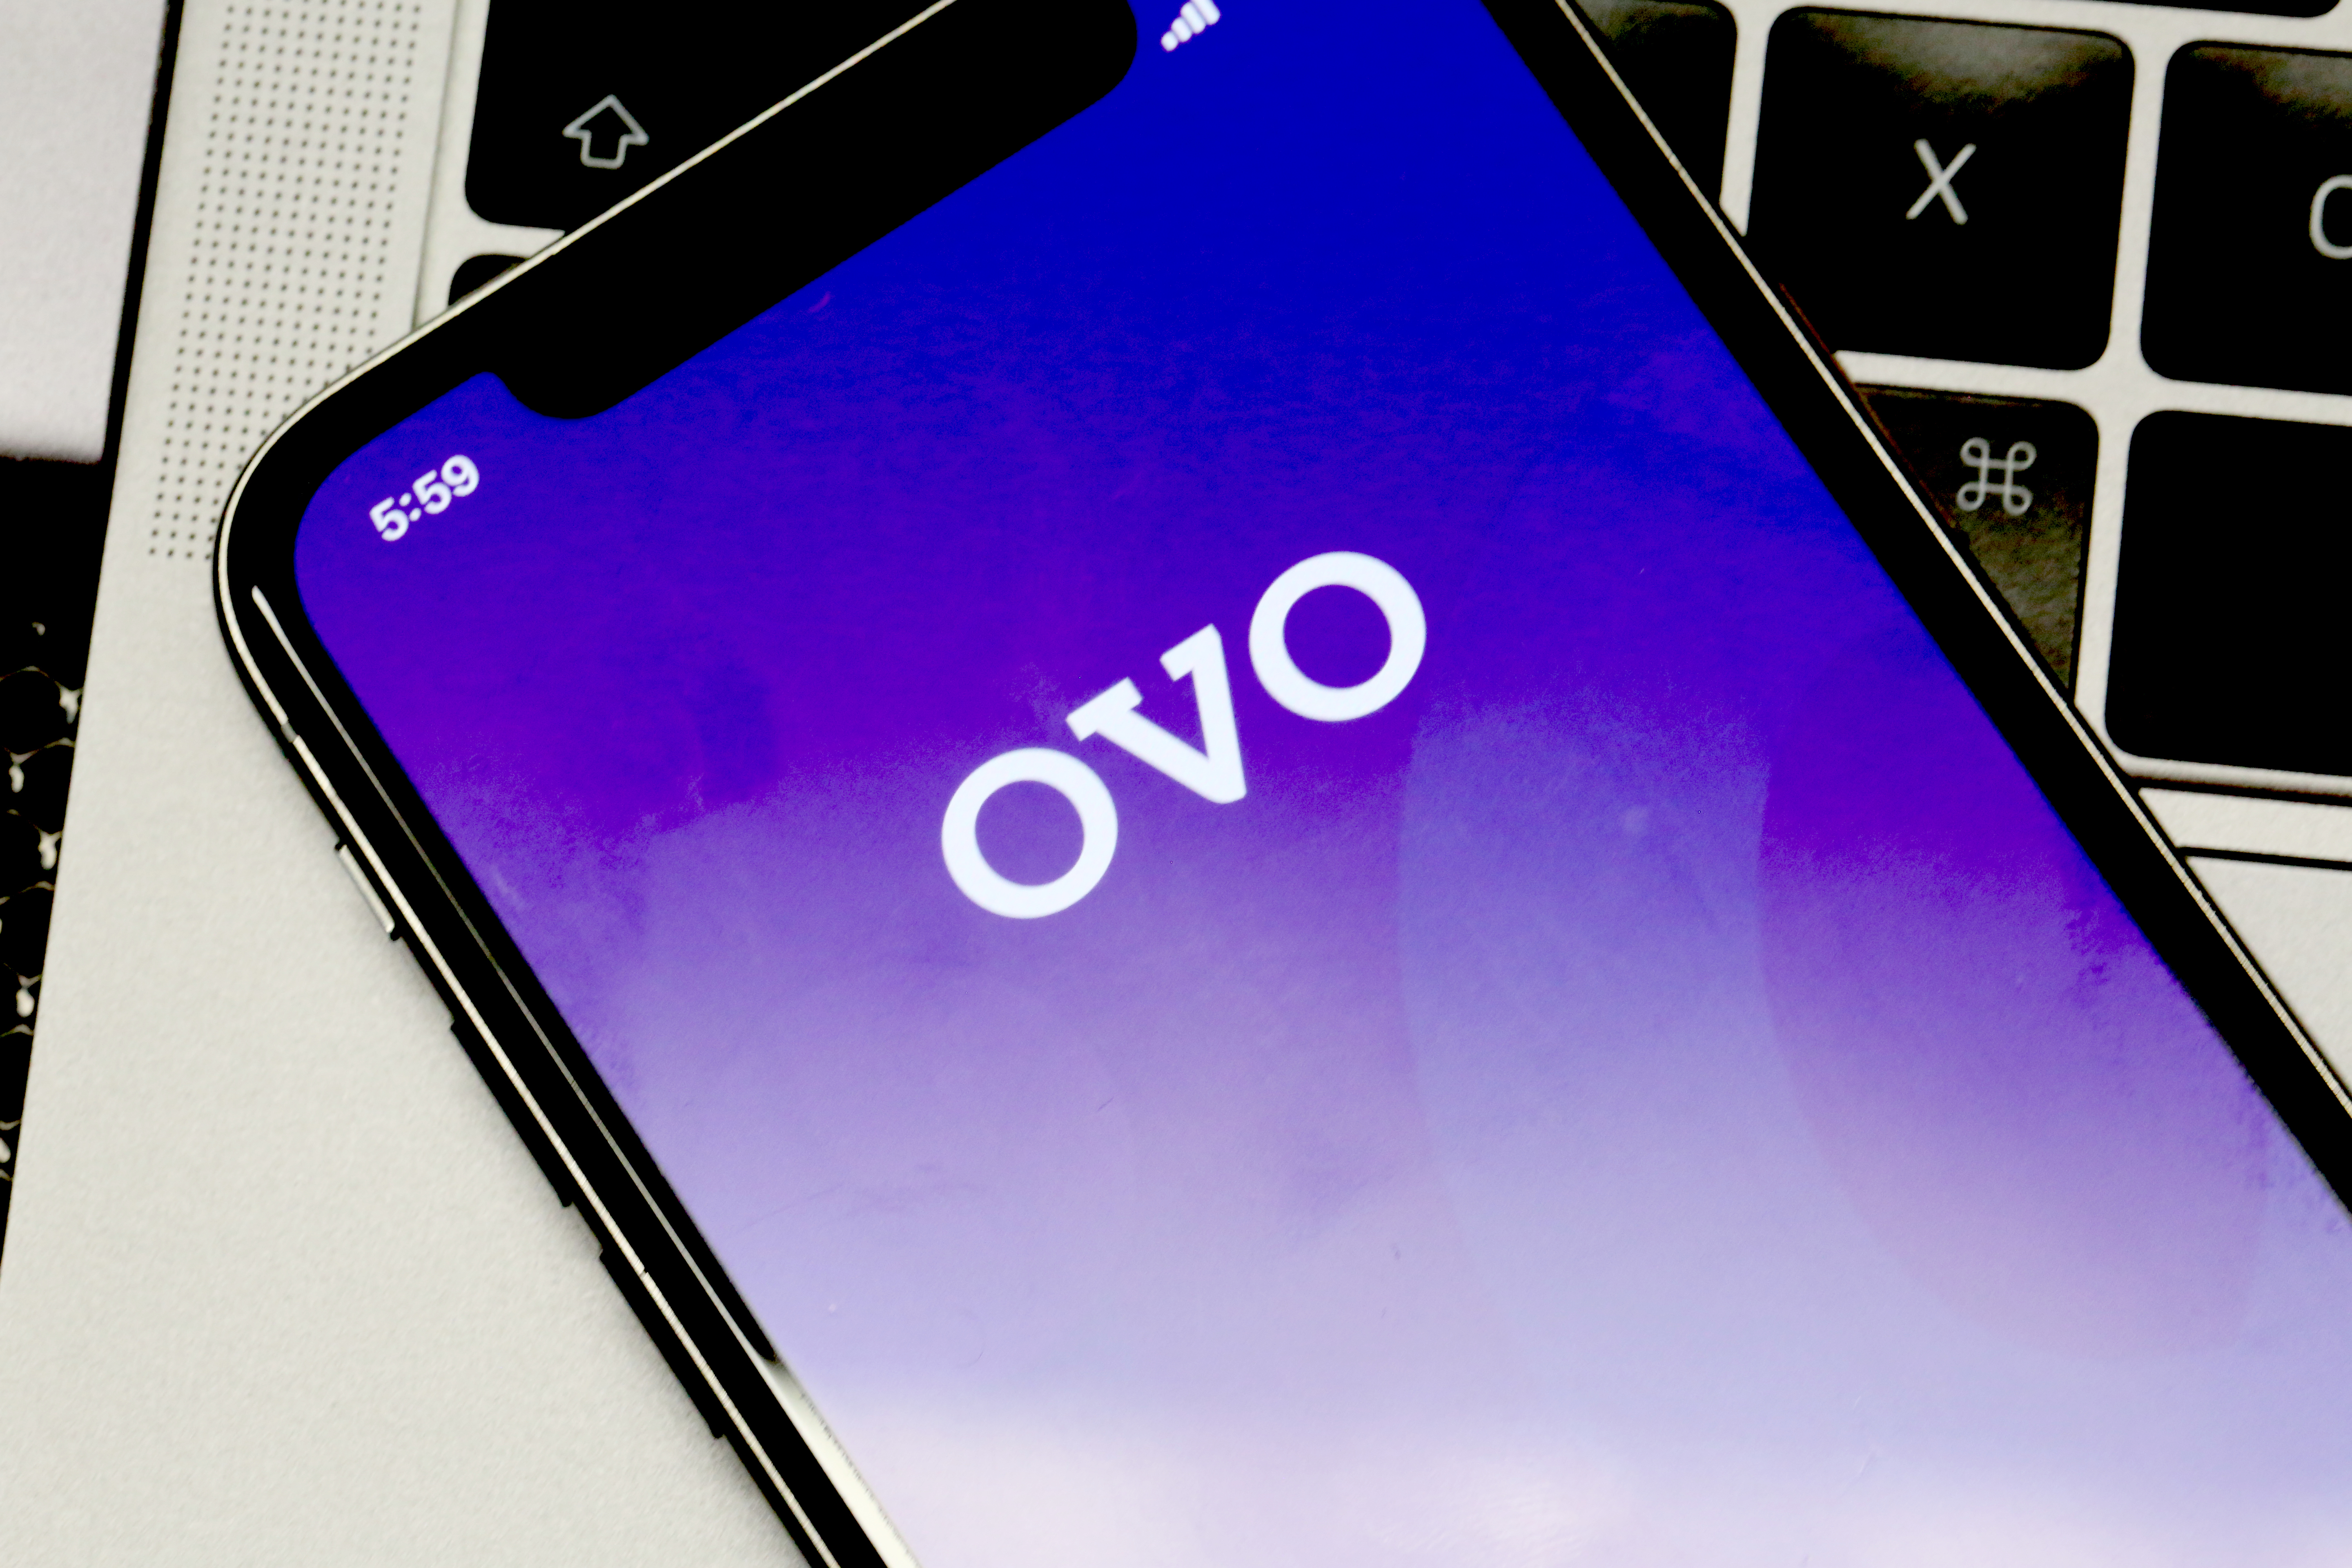 Indonesian mobile wallet Ovo adds mutual funds investment feature